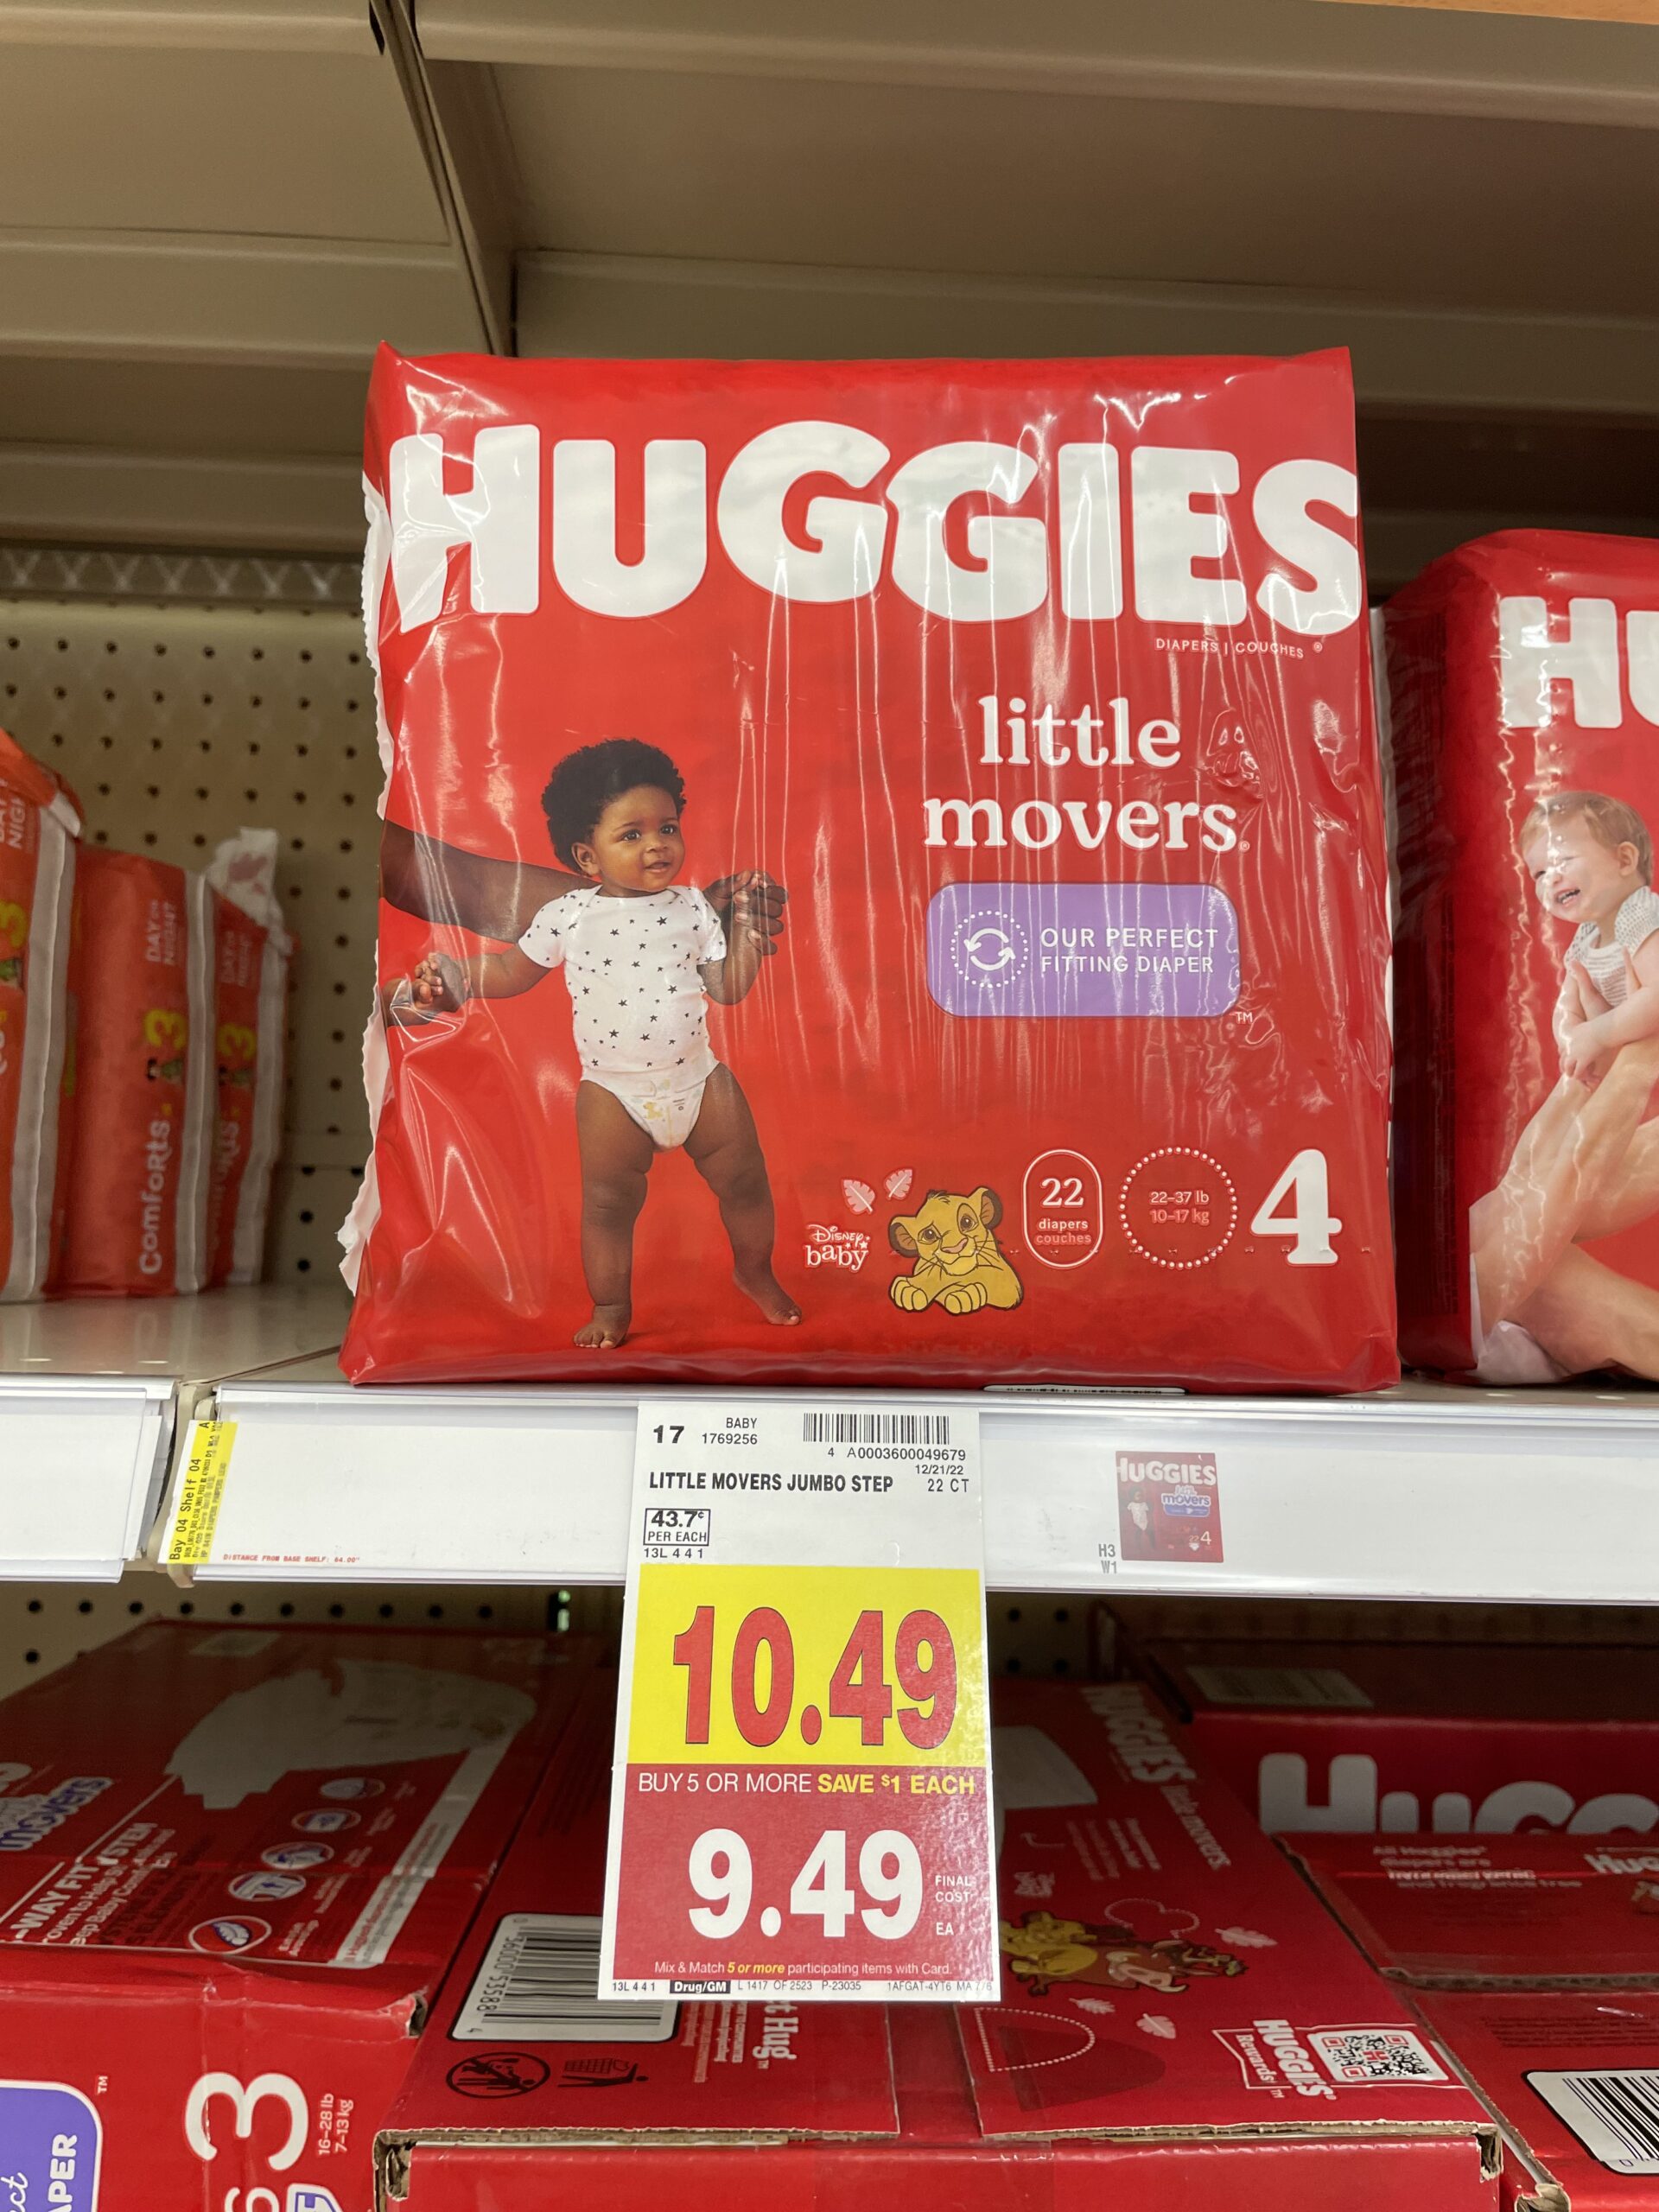 Huggies Little Movers Baby Diapers Size 3 (16-28 lbs), 25 ct - Kroger